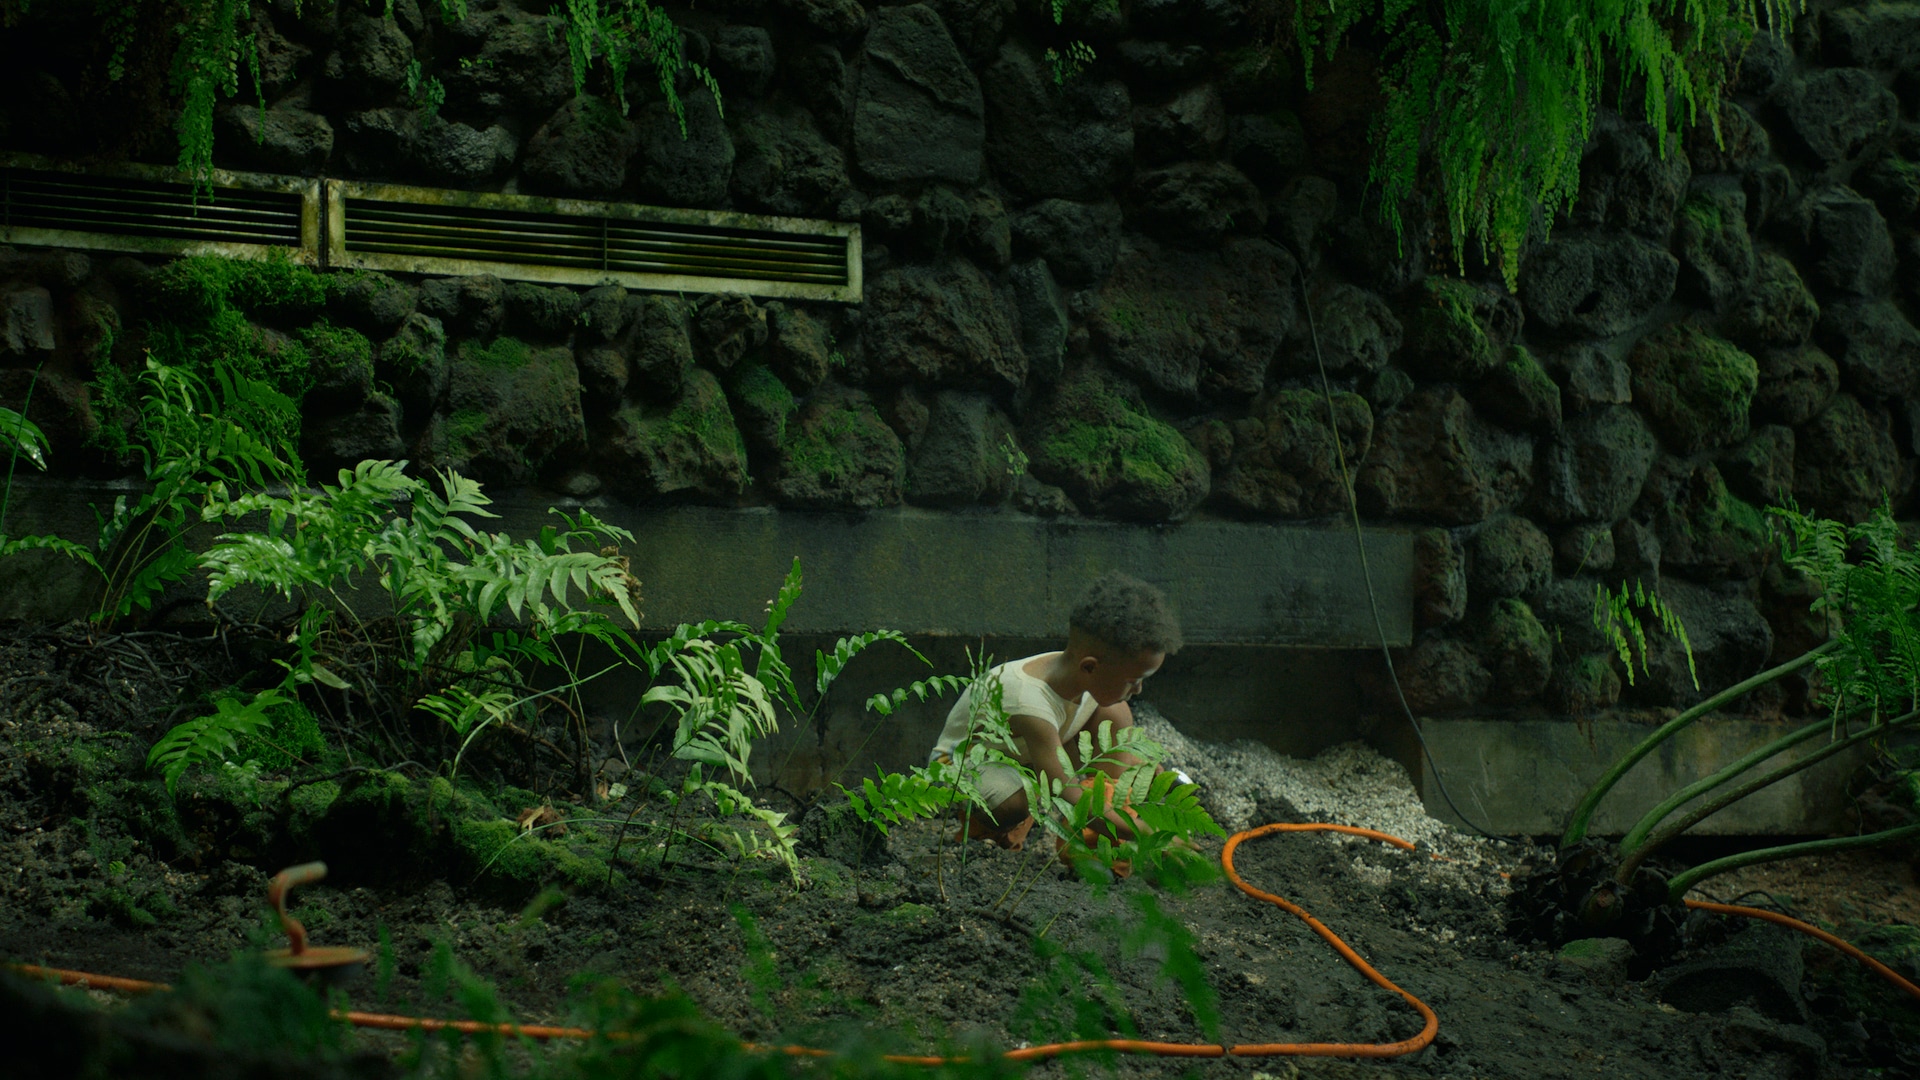 Young boy digging in a garden, a wall of stones with green moss behind him.